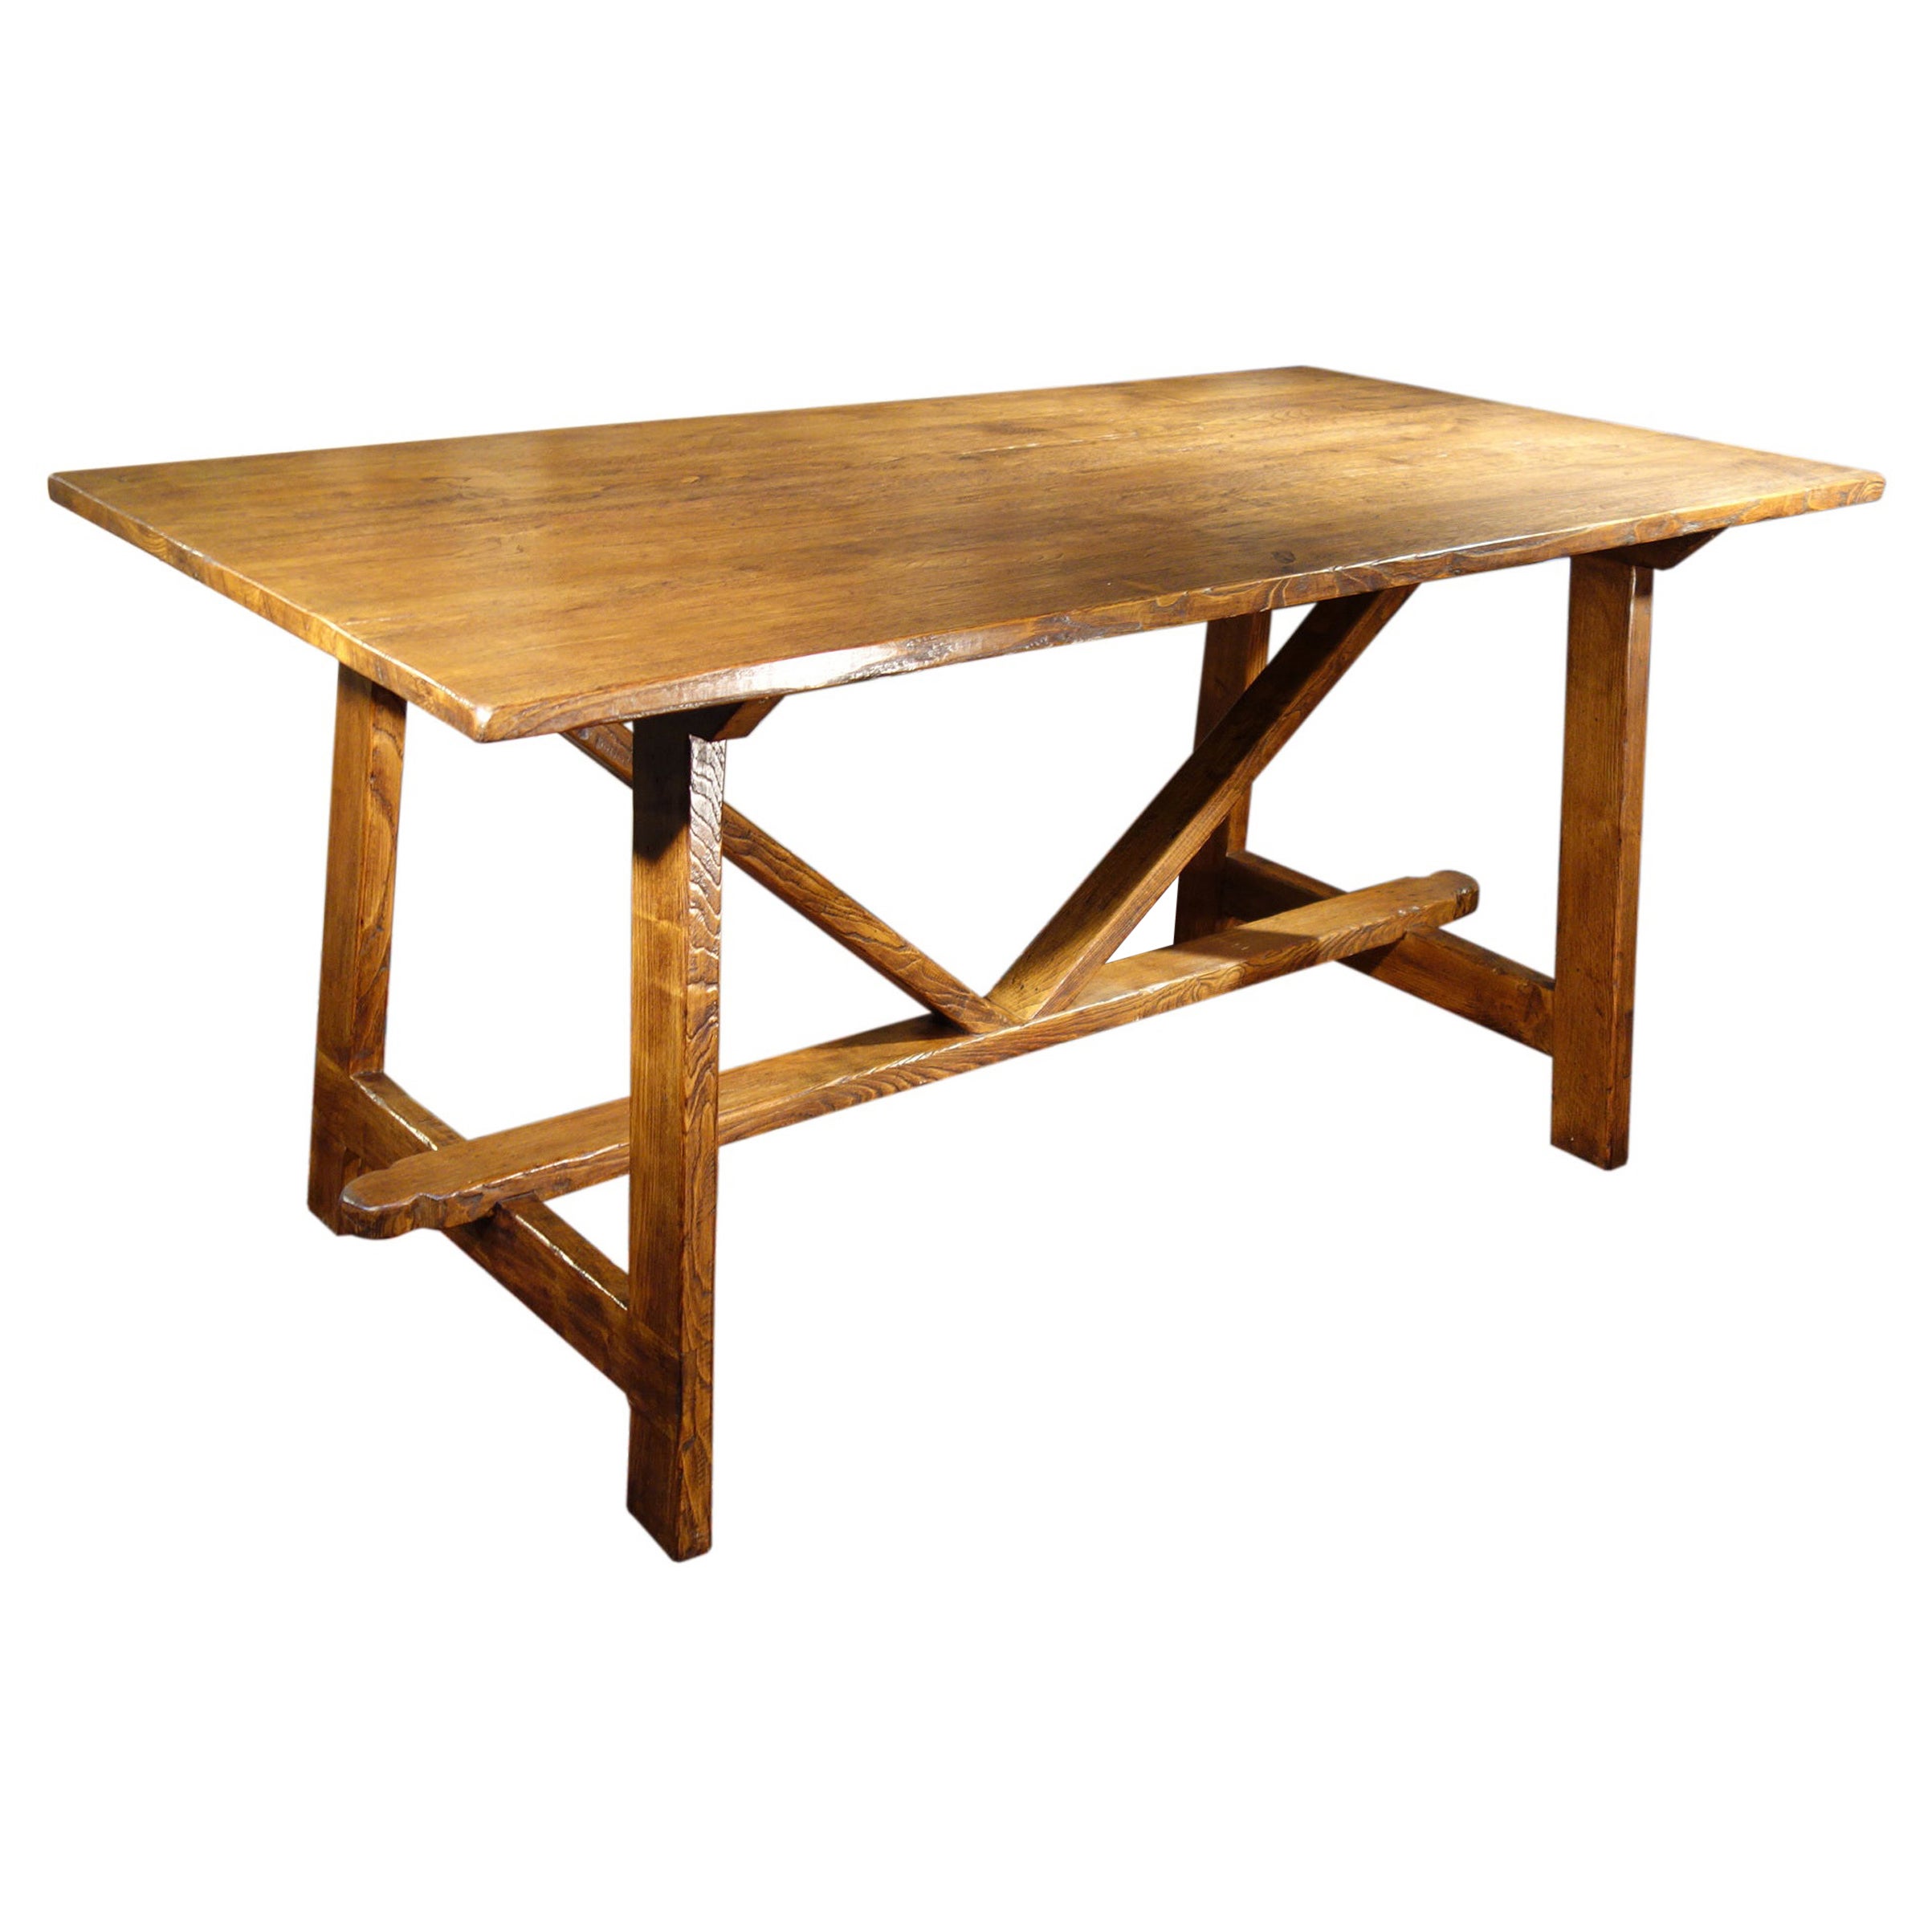 17th C Italian Refectory Style Solid Chestnut CAPRETTA Table with dining options For Sale